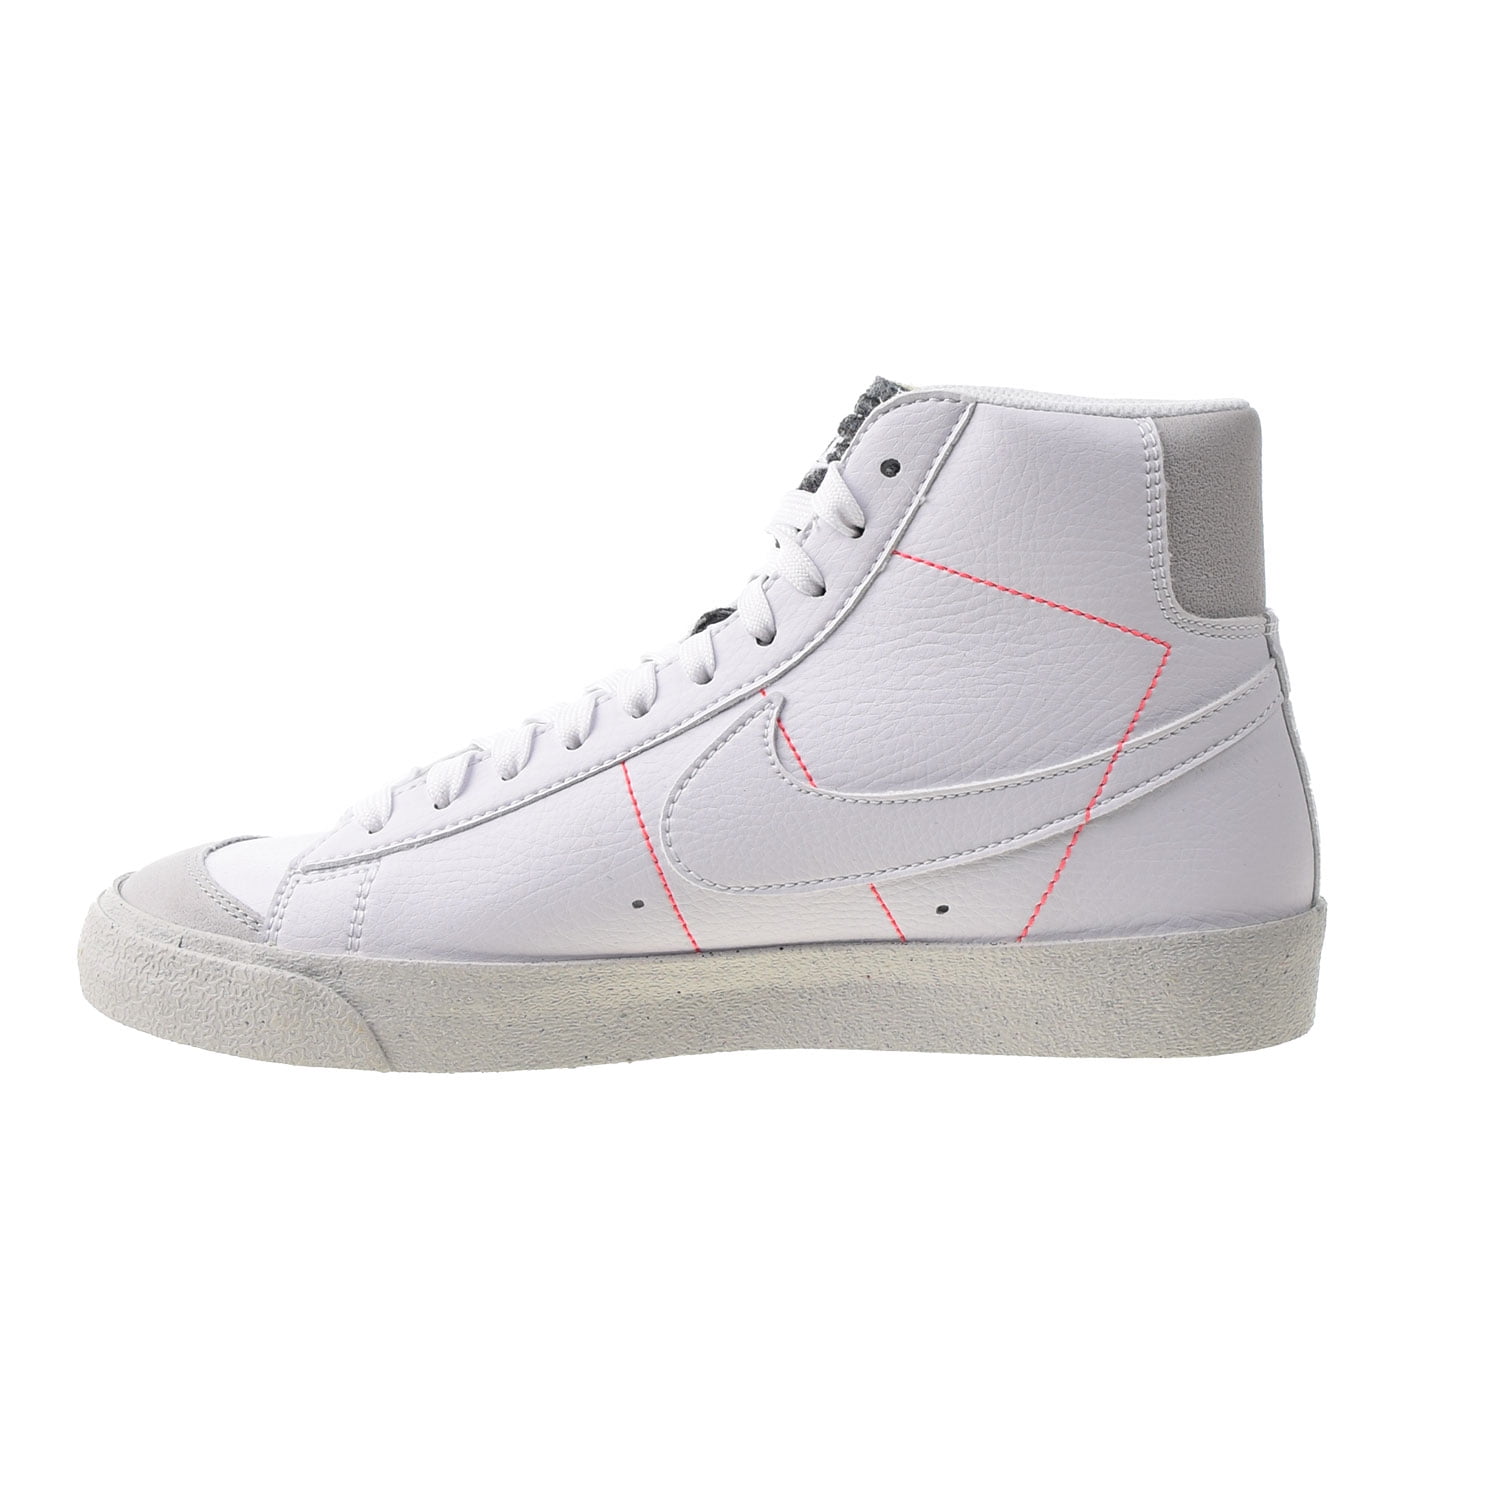 Nike Blazer Mid 77 Womens Shoes Size 5, Color: White/Grey/Red